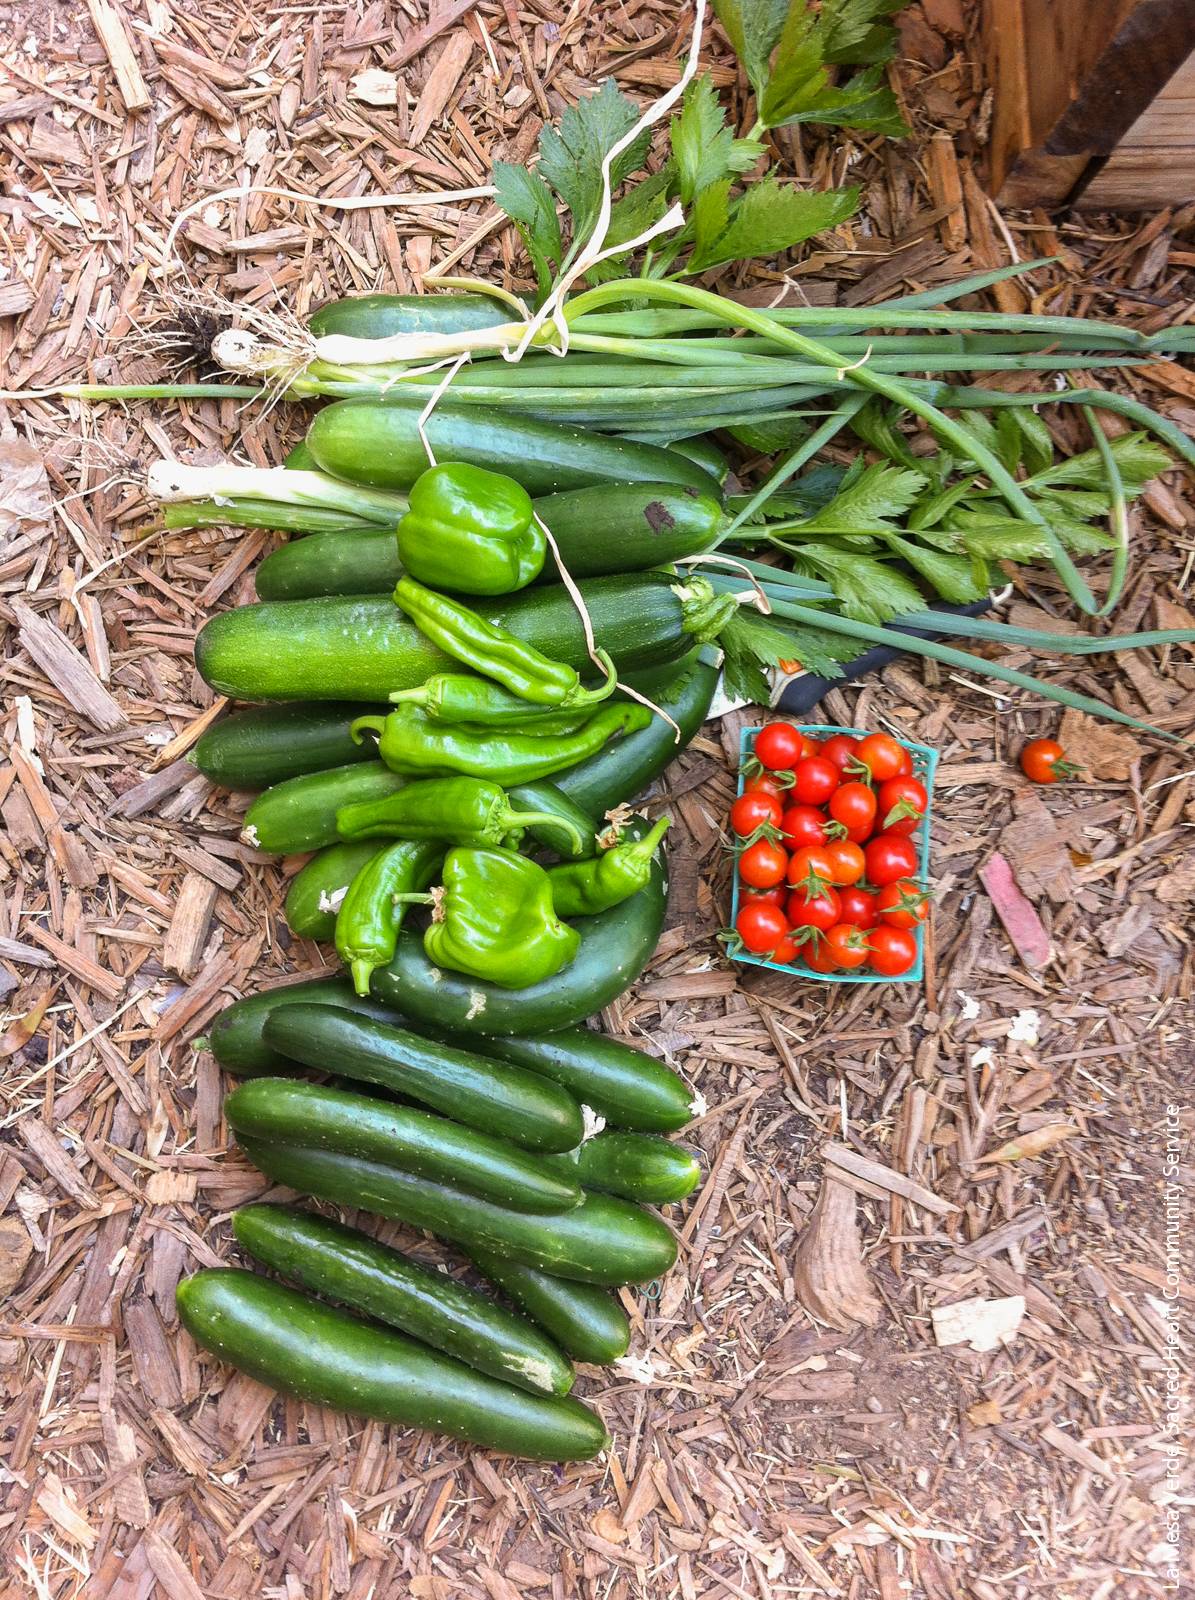 One summer day's harvest from the demonstration garden located at Sacred Heart Community Service in San Jose. Both home and community gardeners doubled their vegetable intake to an average of 4 cups per day during the peak of the summer growing season.